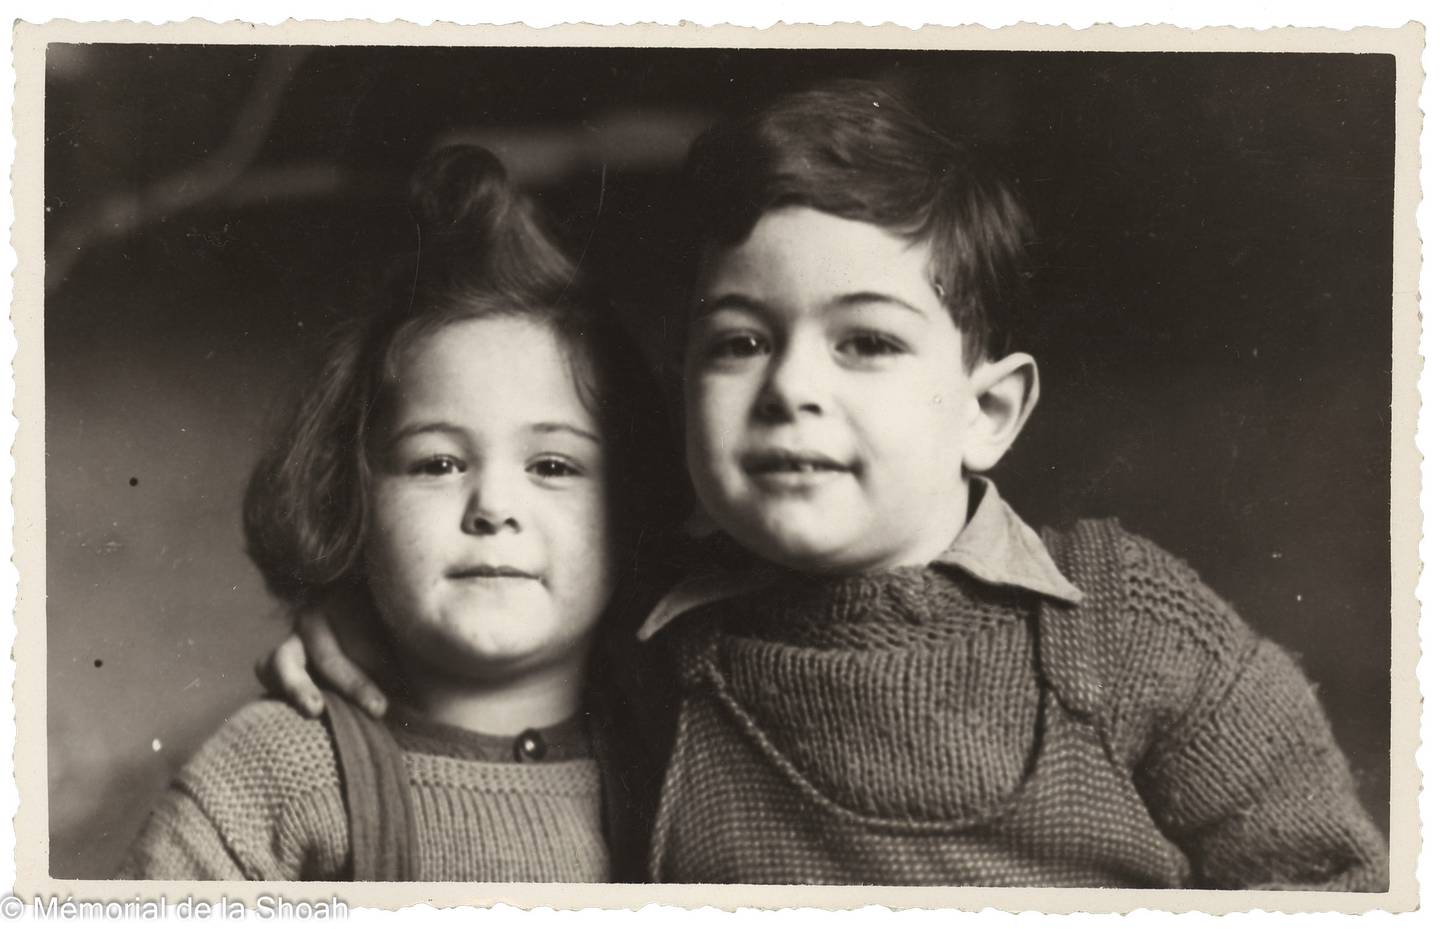 Armand and Eve Herscovici, hidden by the Marcel Network, pictured in 1943 or 1944. Memorial de la Shoah / Collection Odette Abadi